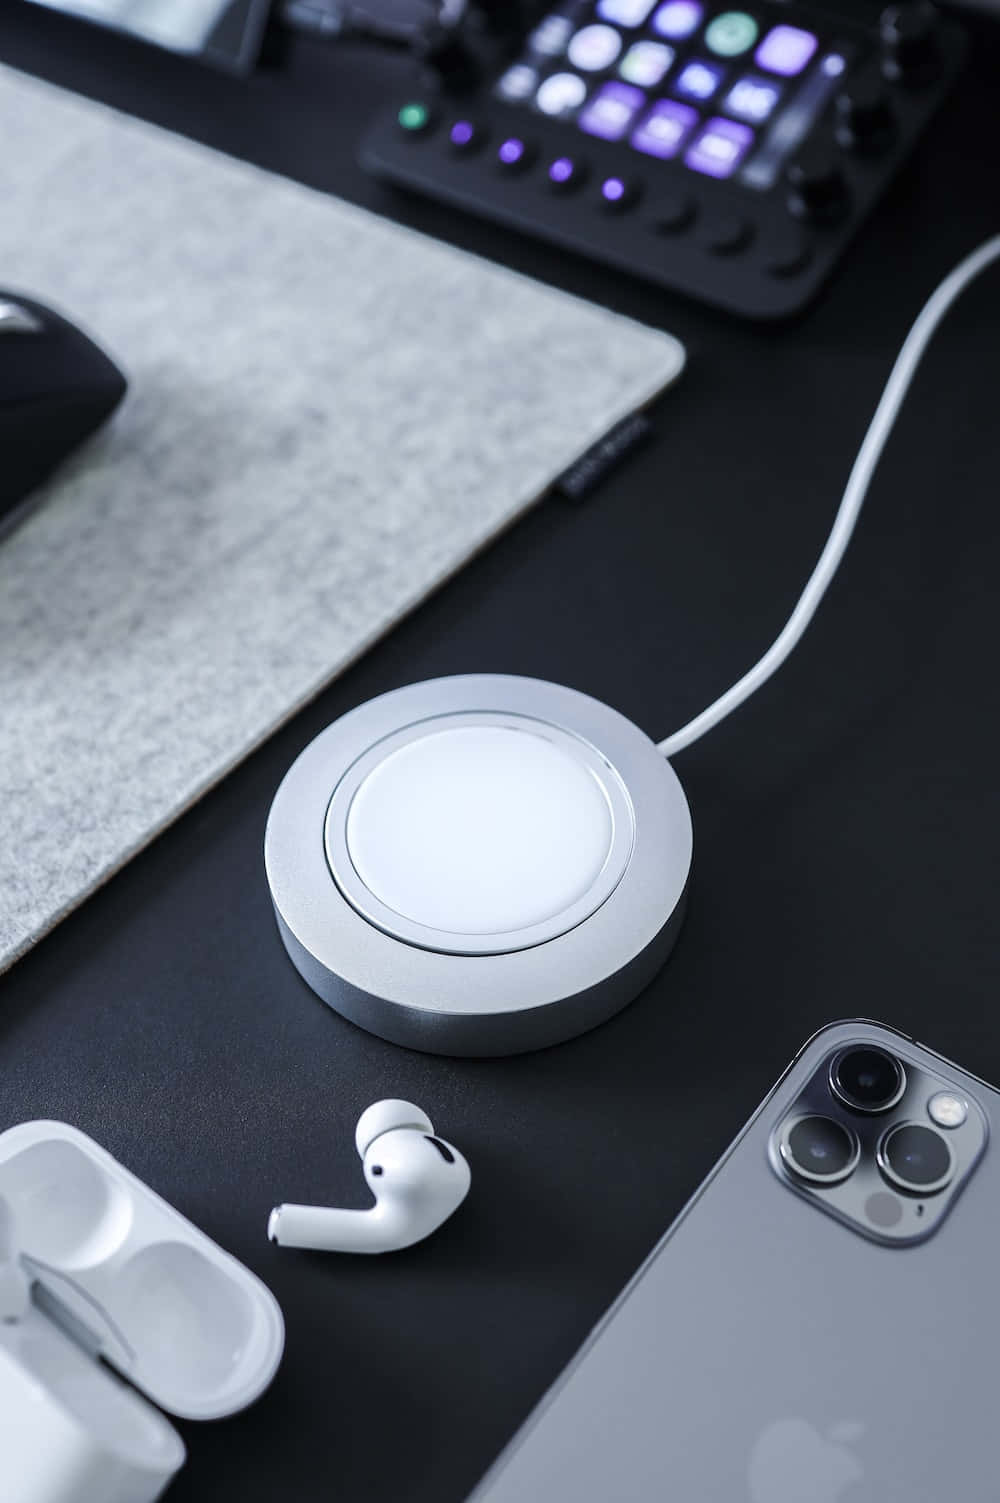 Get power anytime, anywhere with wireless charging. Wallpaper